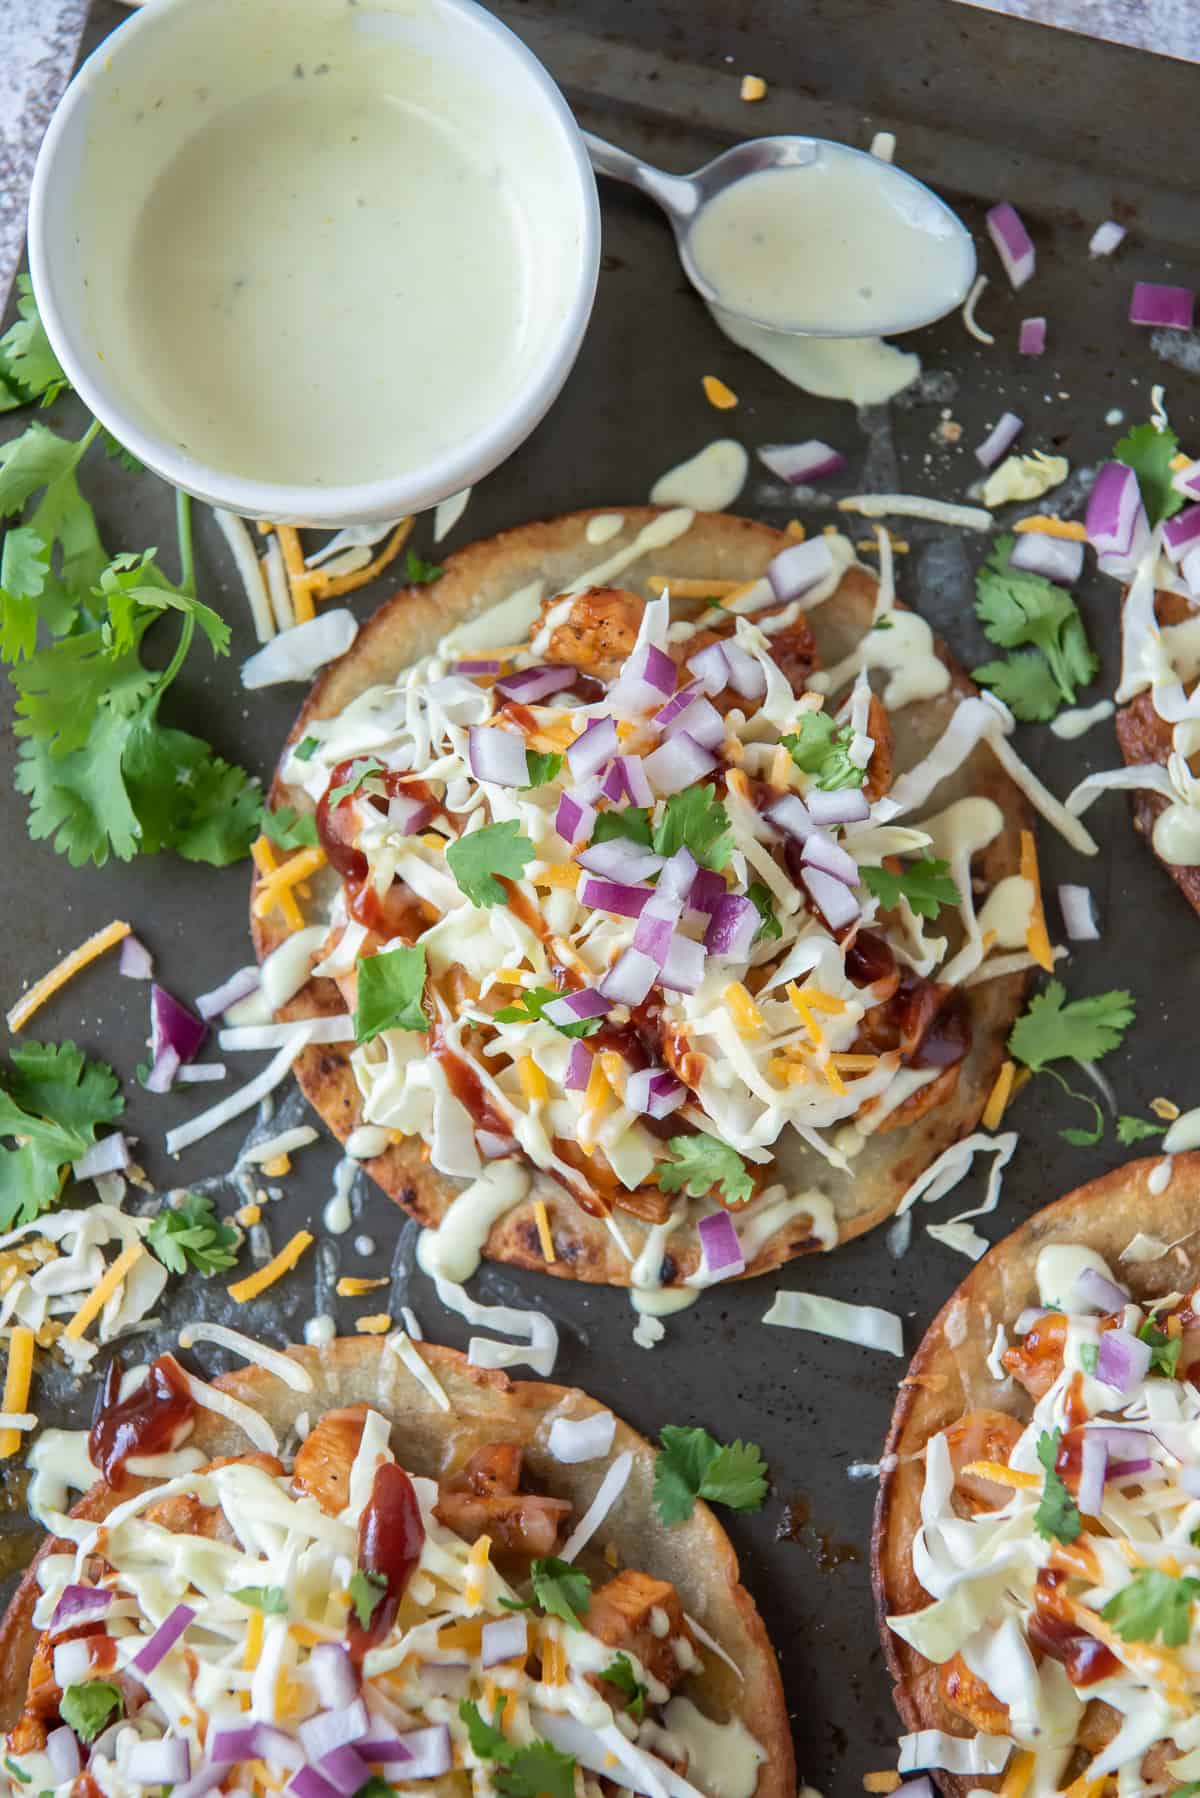 Tostadas and a small bowl of salad dressing on a baking sheet.